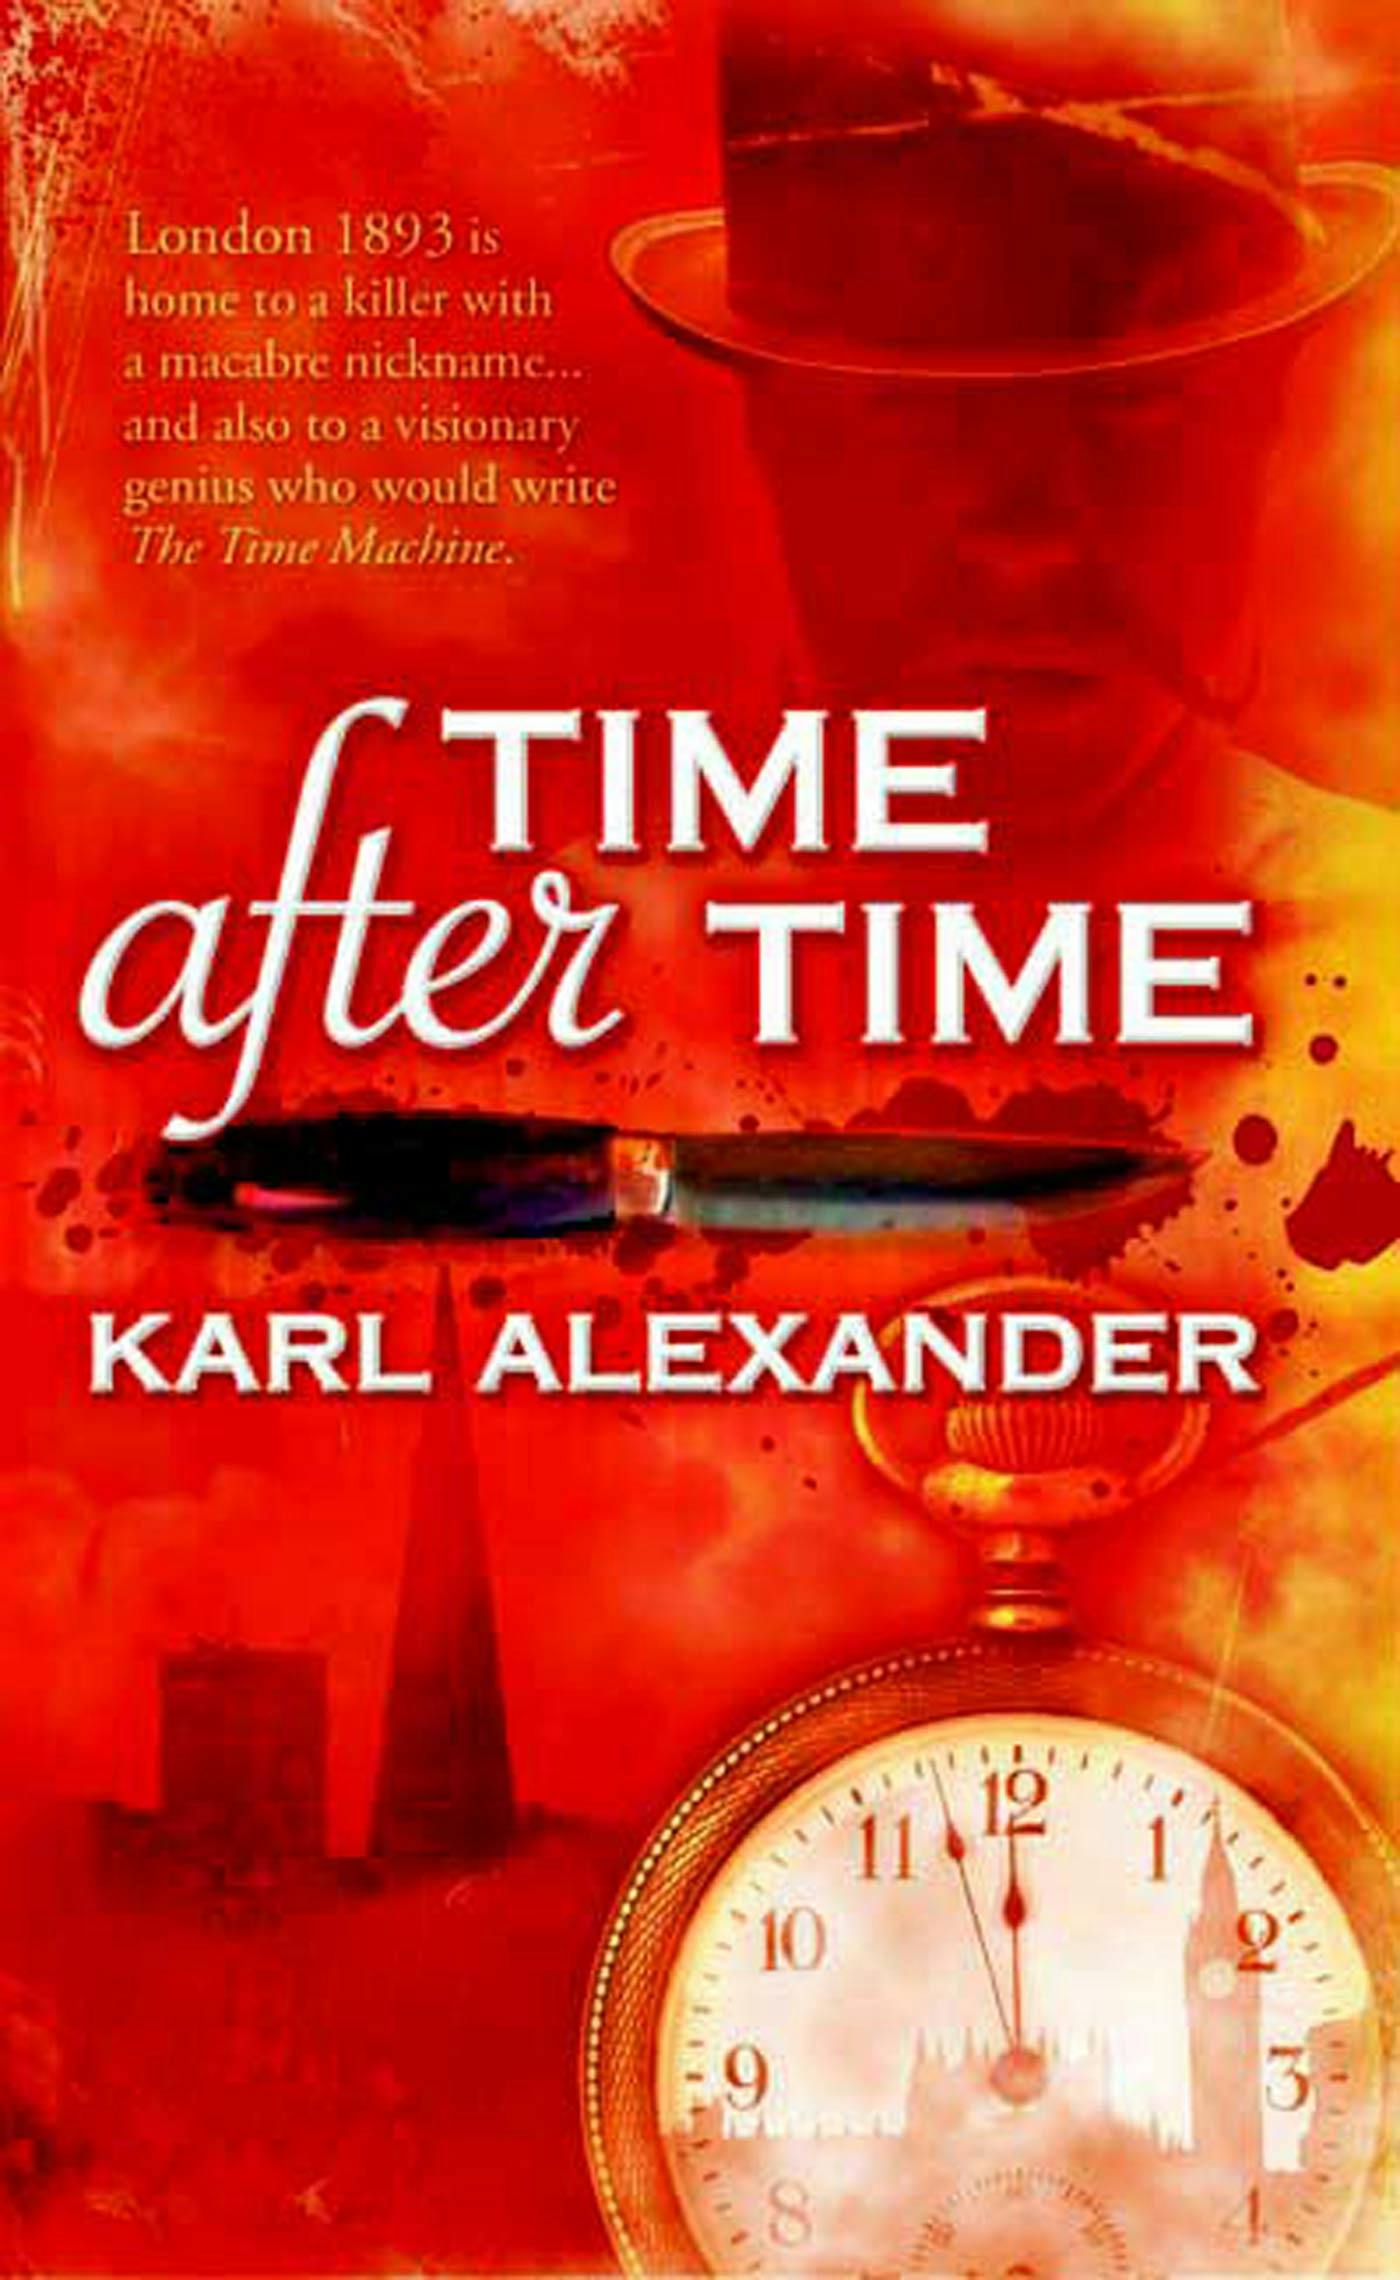 Cover for the book titled as: Time After Time